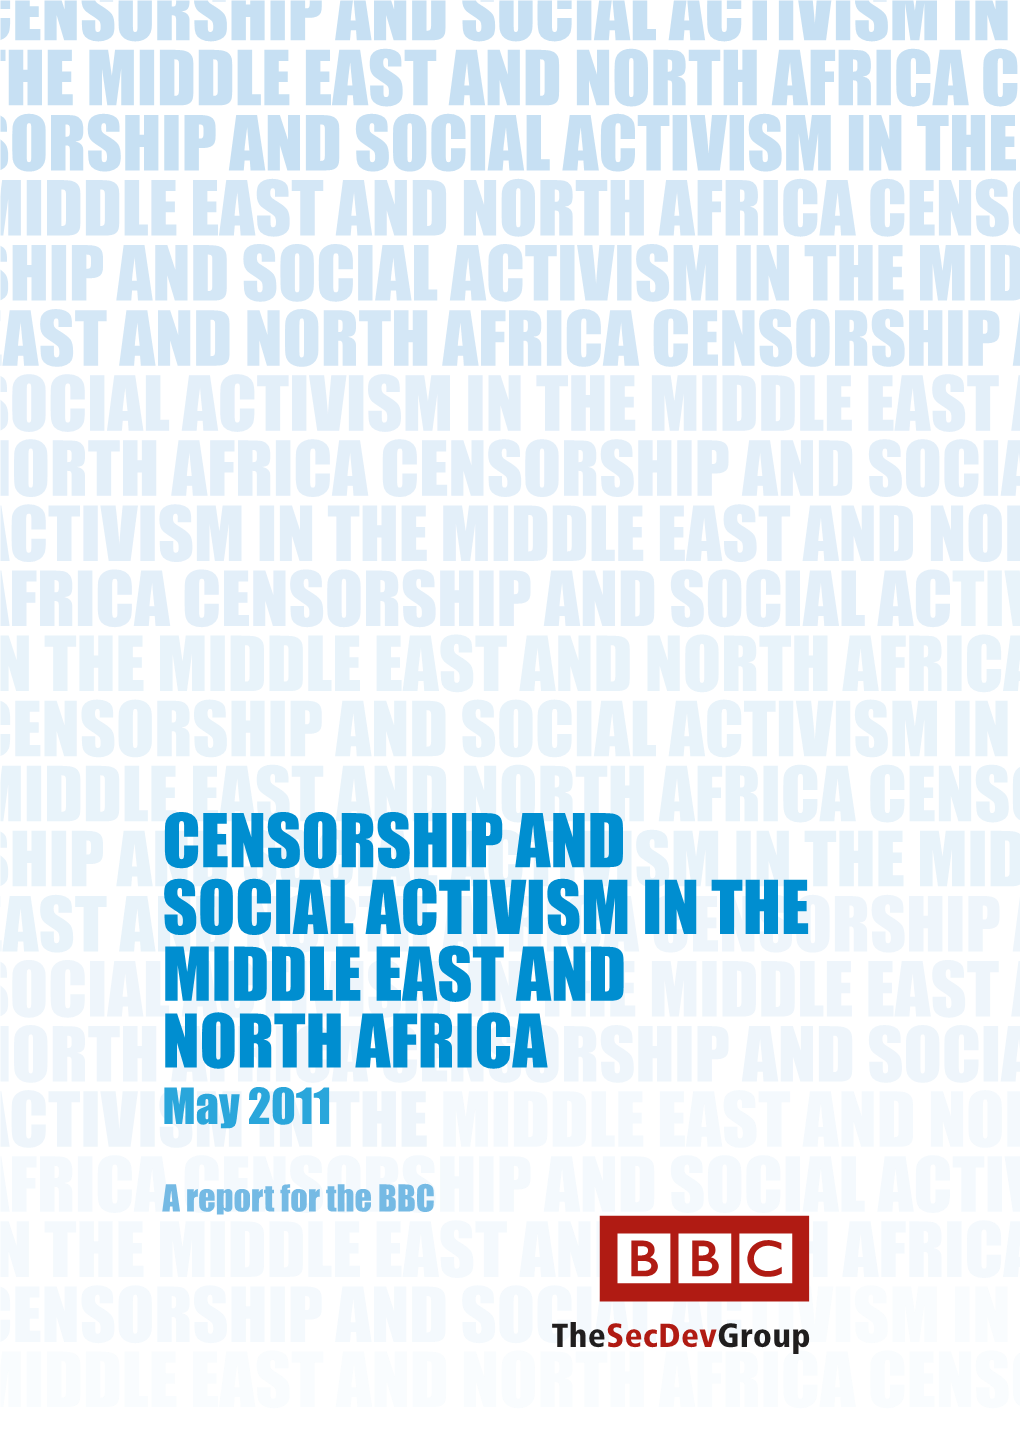 Censorship and Social Activism in the Middle East and North Africa